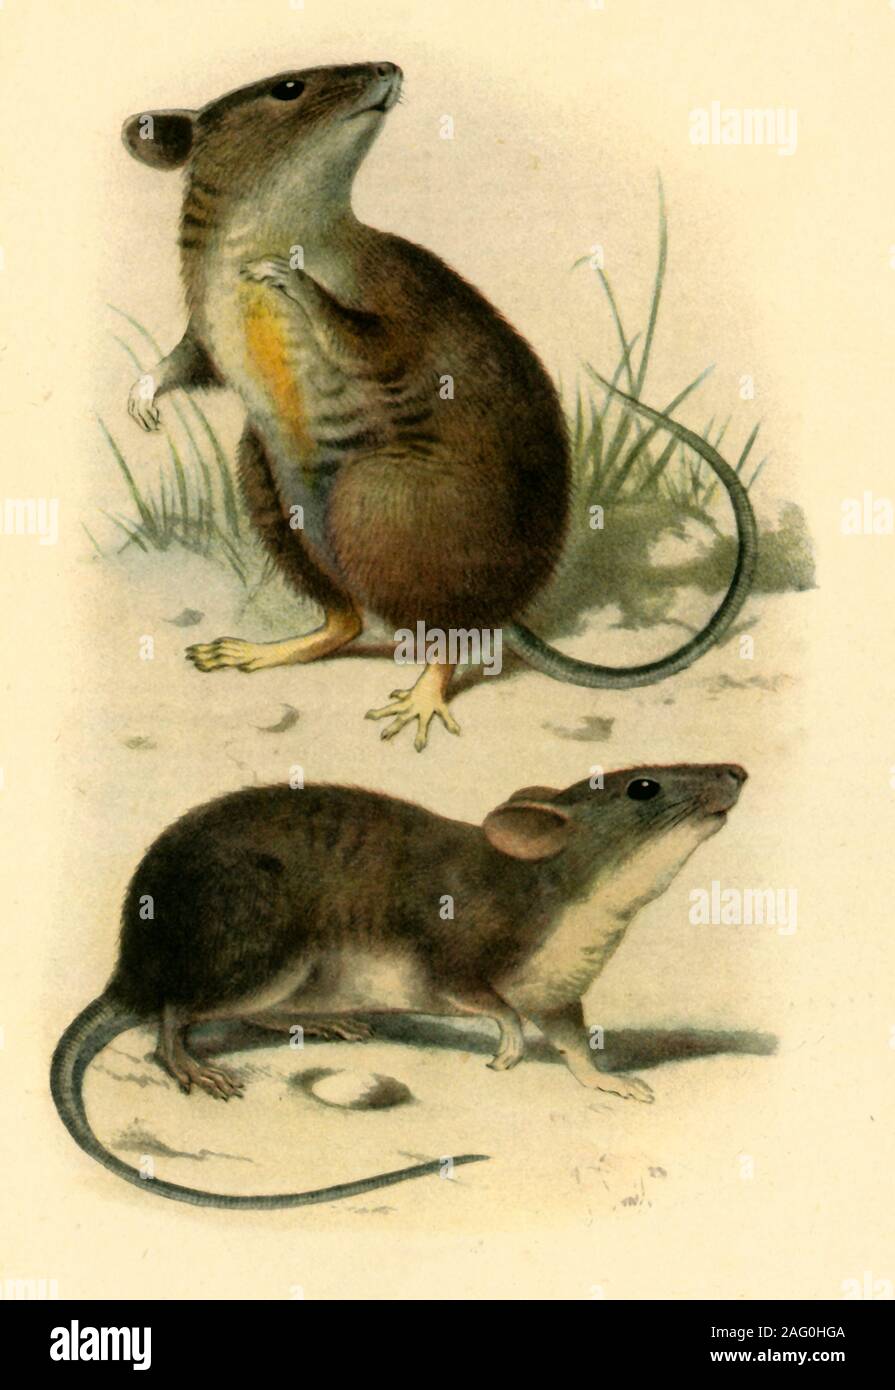 'St. Kilda Mice', 1899, (1943). Type of mouse found only on the remote islands of the St Kilda archipelago of northwest Scotland. From &quot;The Proceedings of the Zoological Society&quot;, 1899. Published in &quot;Wildlife of Britain', by F. Fraser Darling. [Collins, London, 1943] Stock Photo